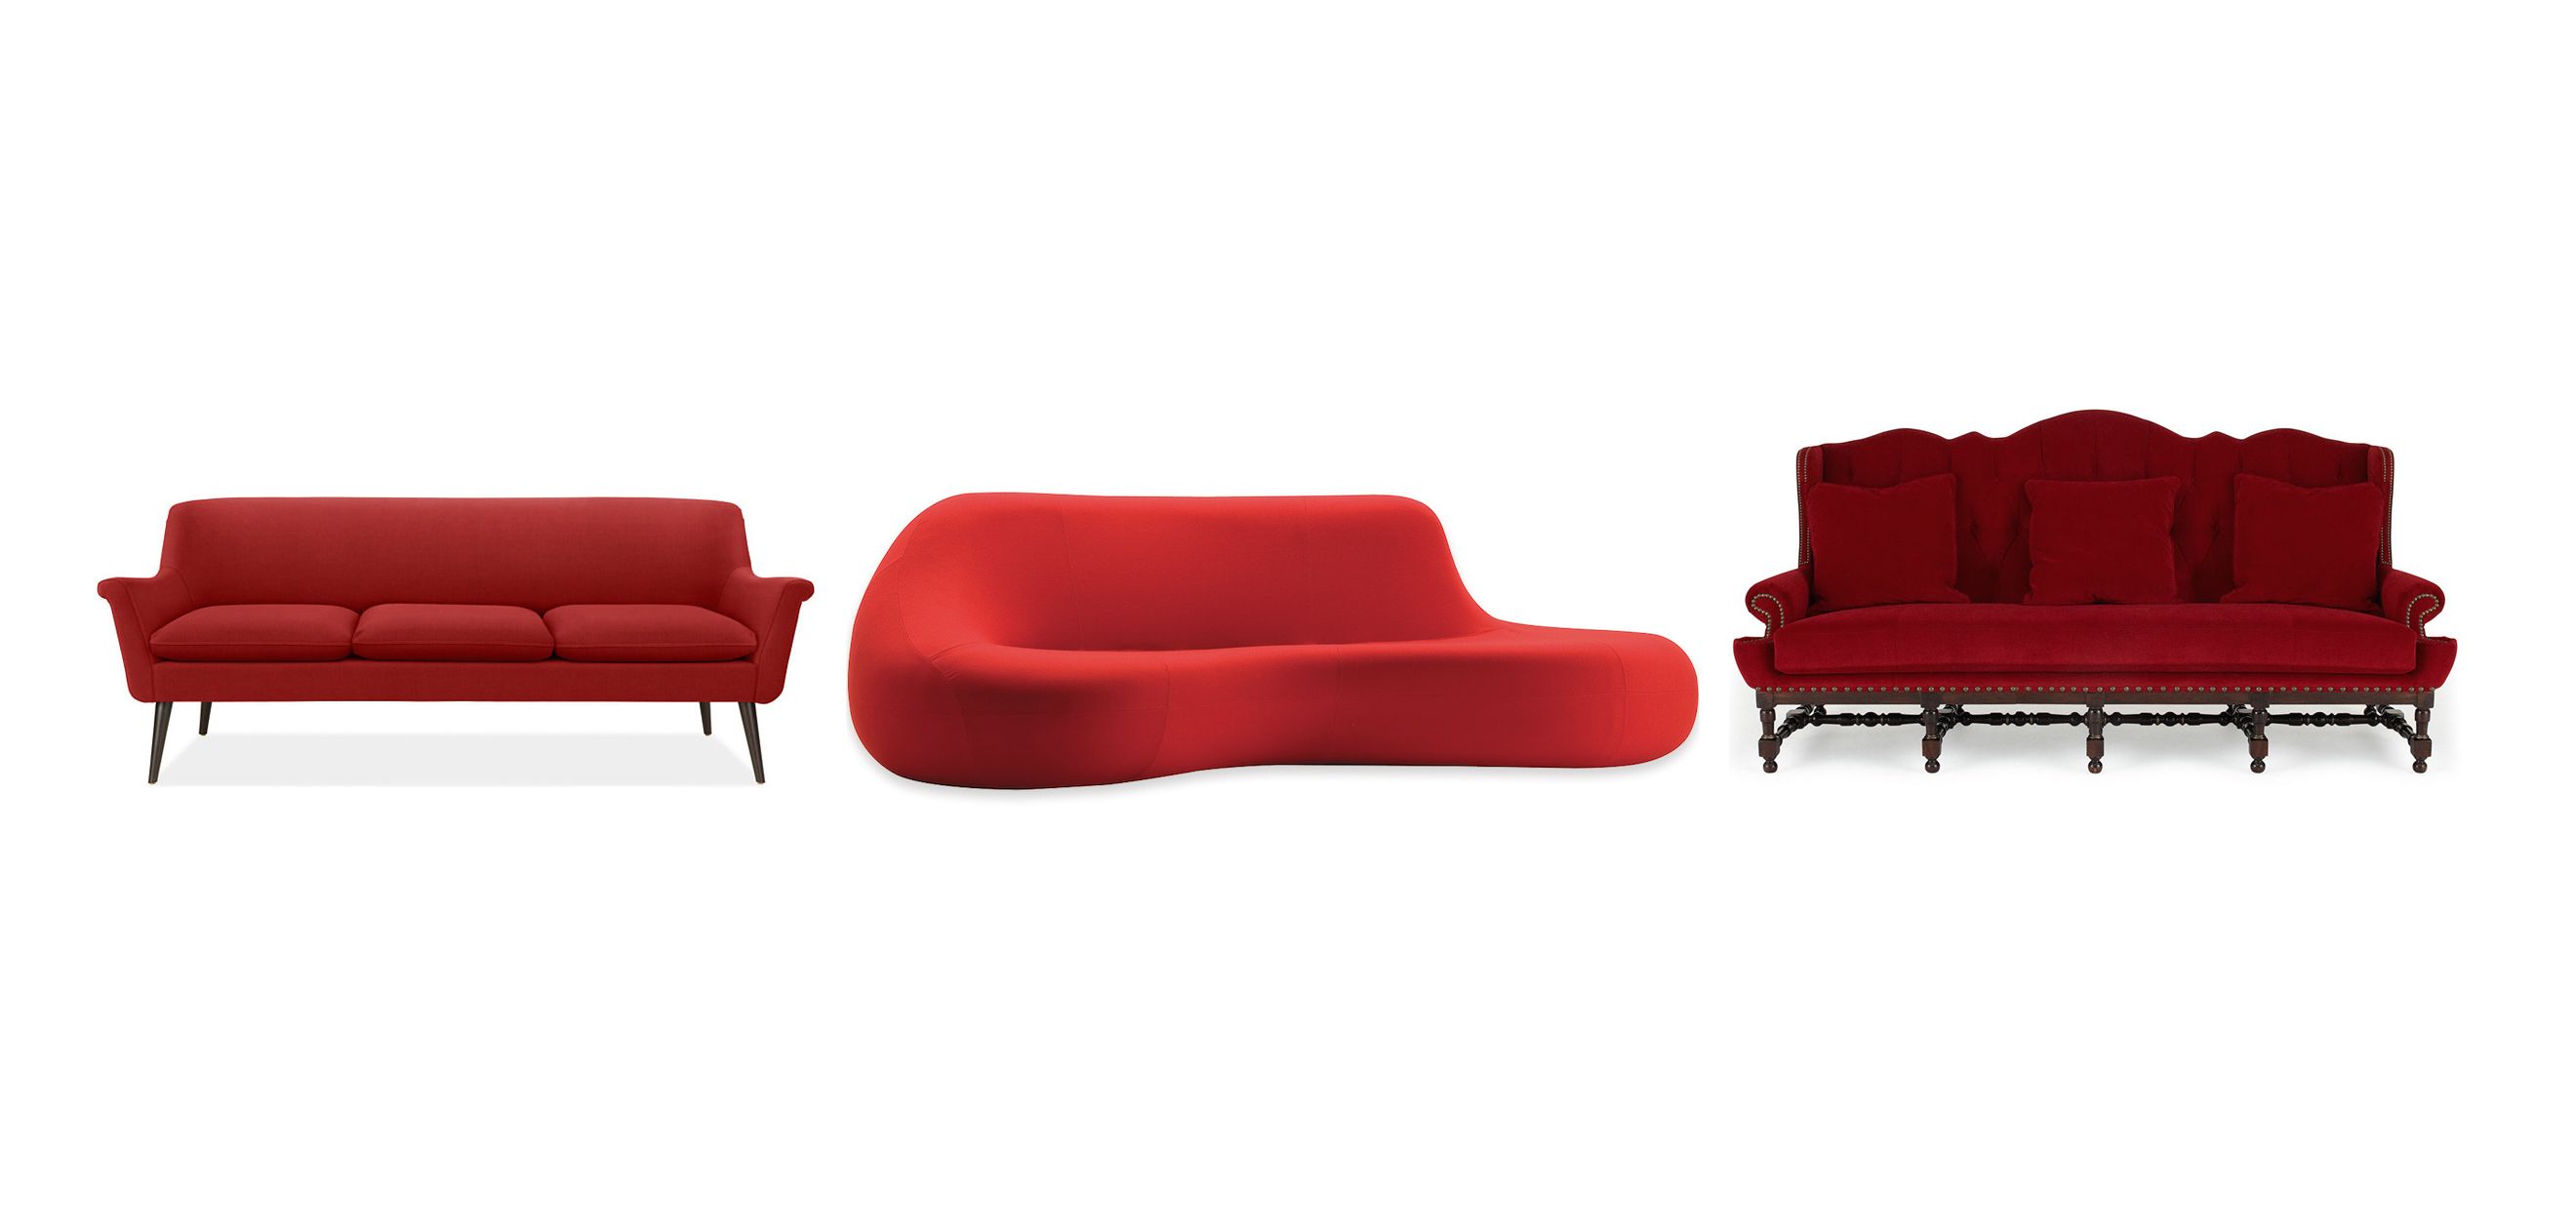 20 Best Red Couch - Red Sofas